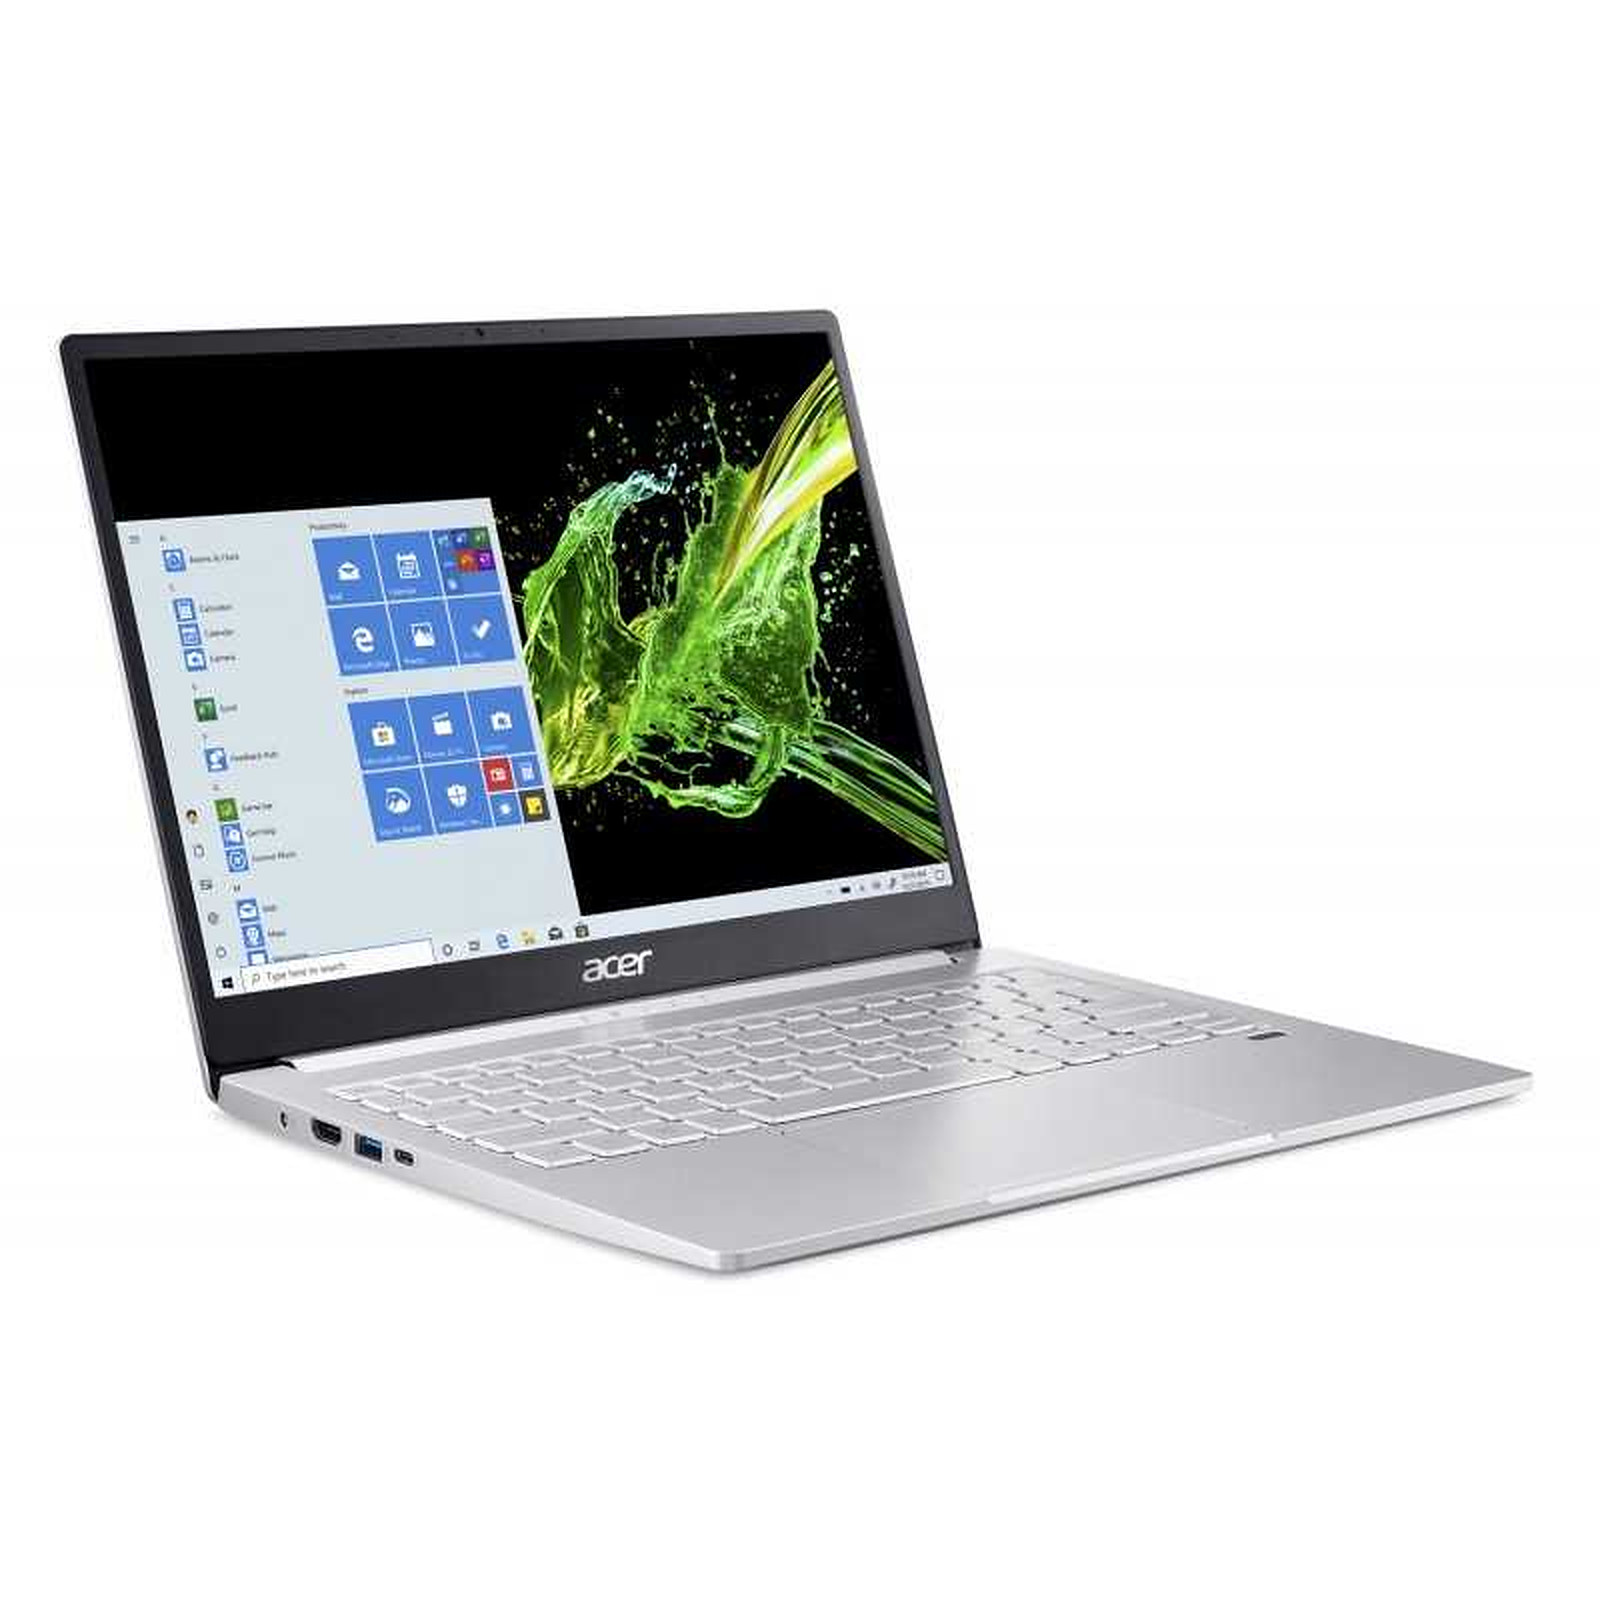 Acer Swift 3 SF313-52-56B0 (NX.HQWEF.001) · Reconditionne - PC portable reconditionne Acer